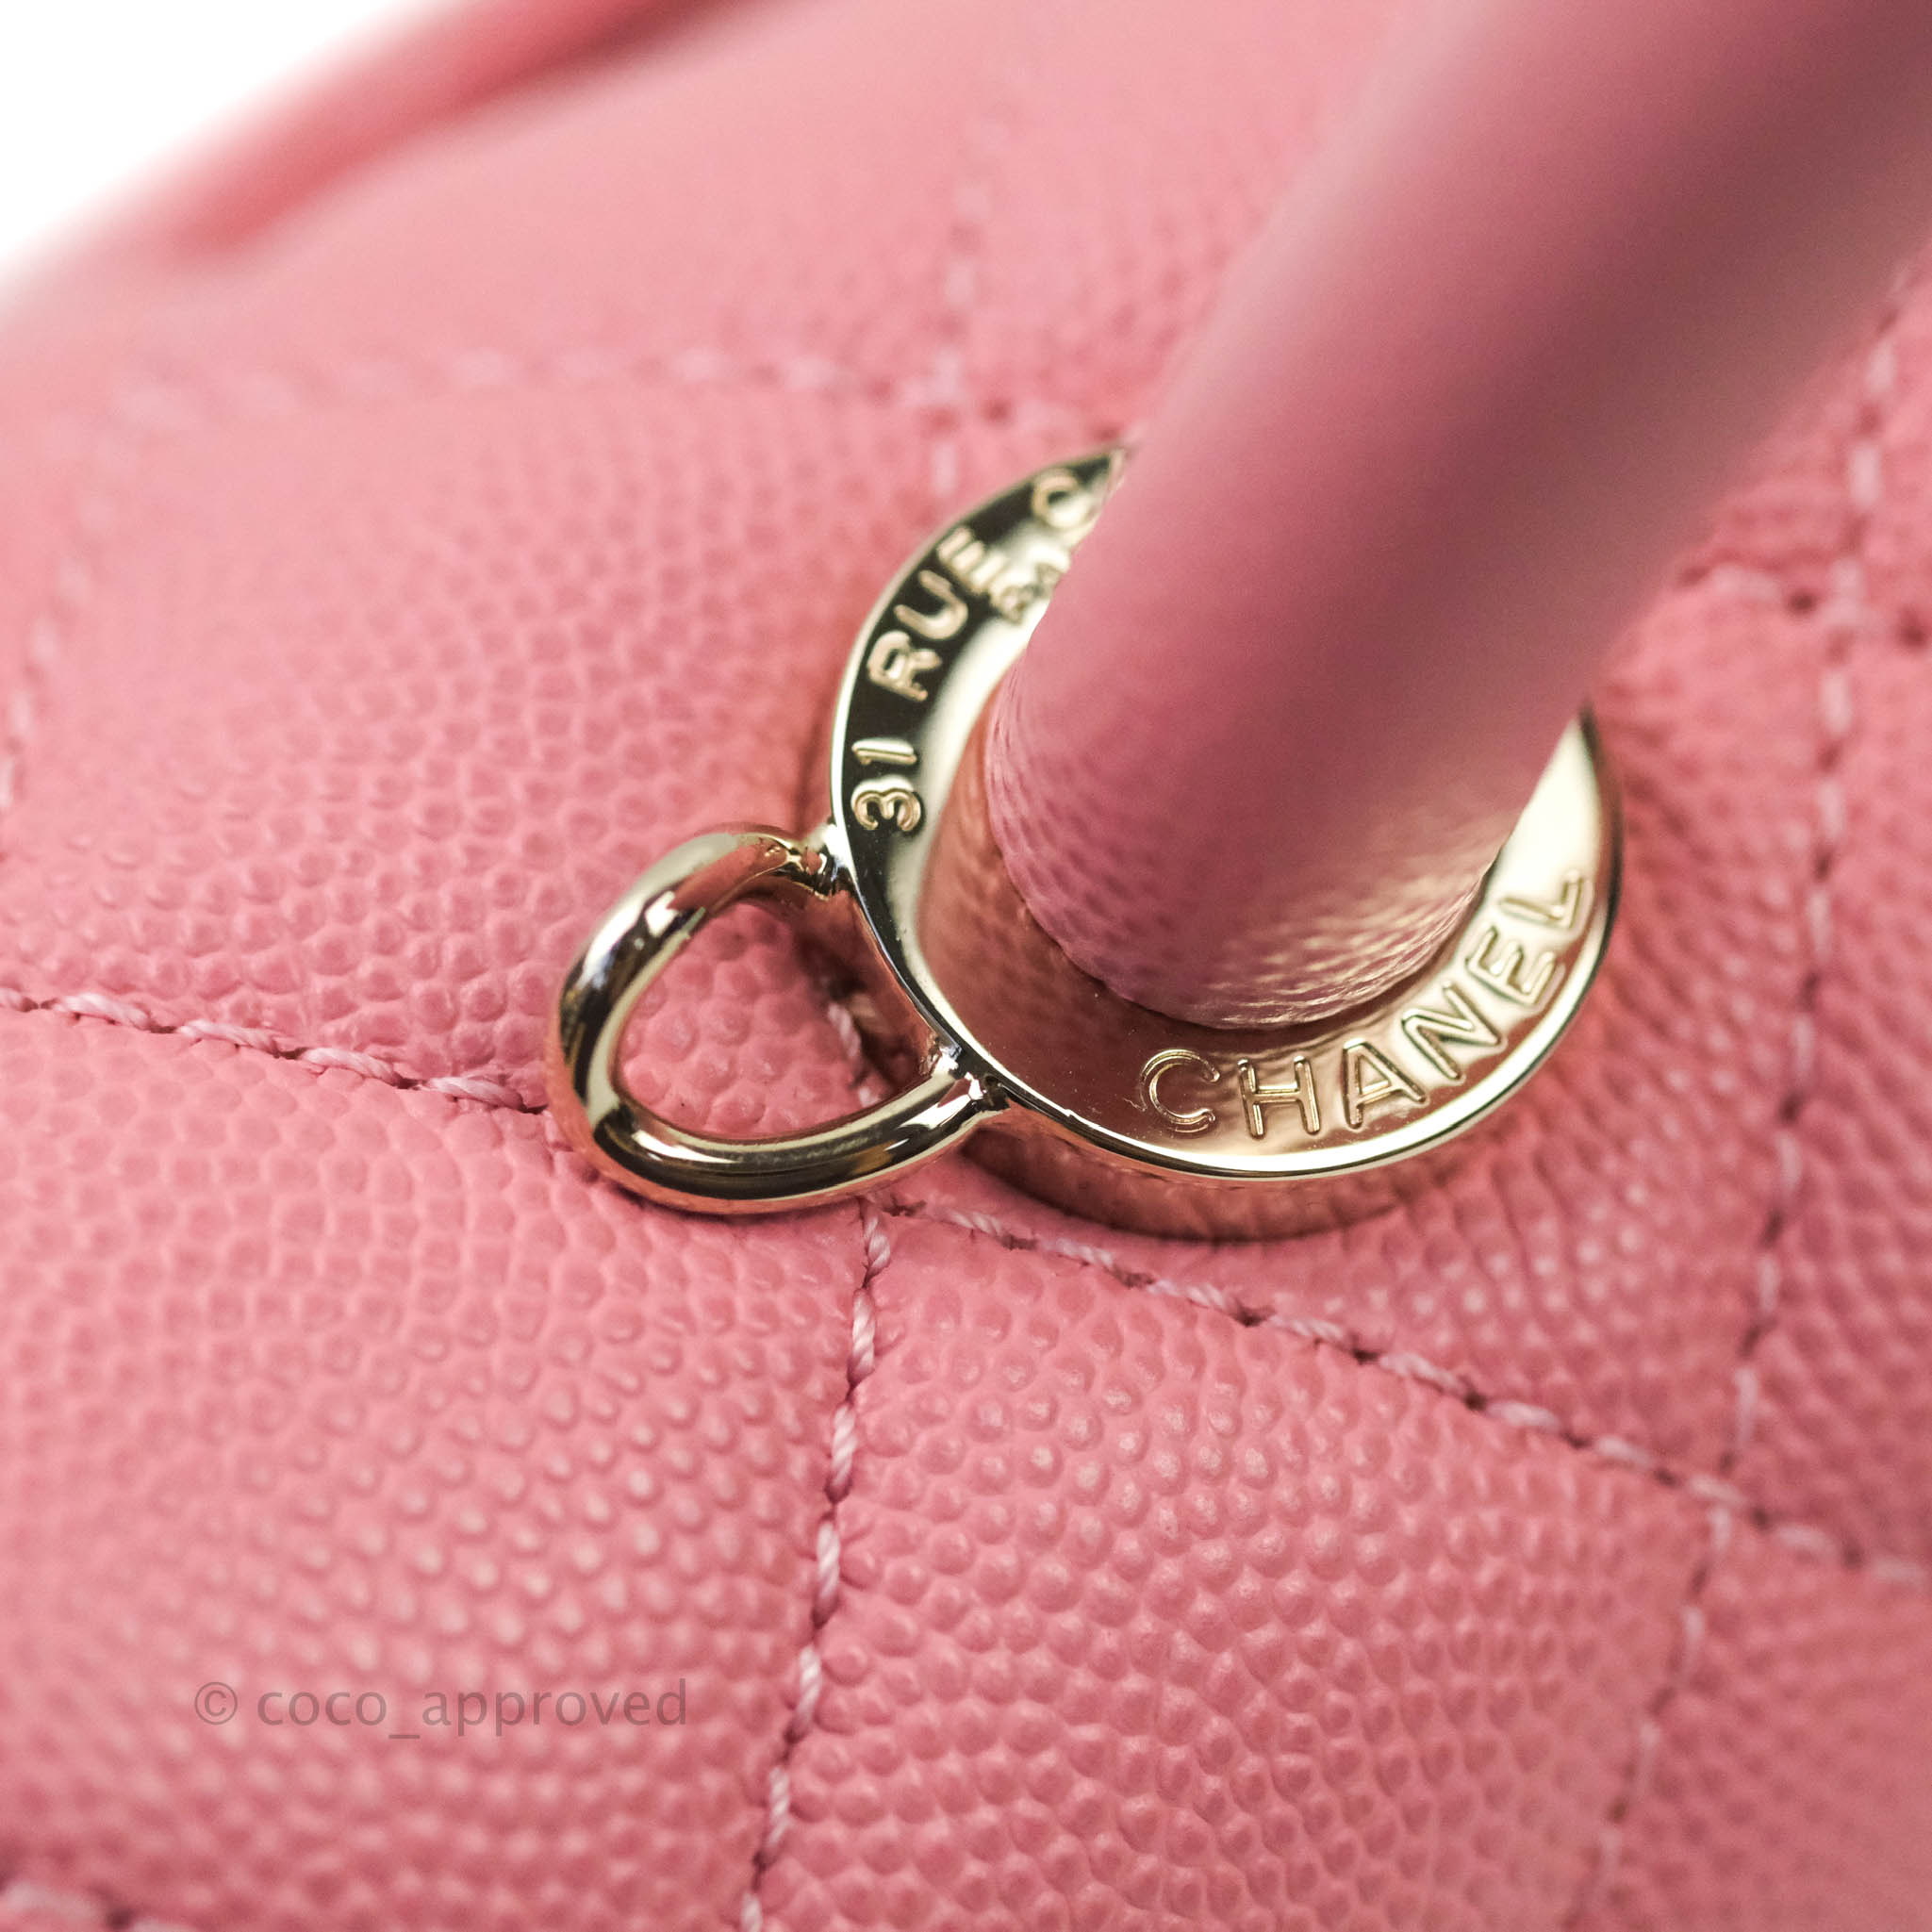 My Wife's Search For Her Latest Dream Handbag – Small Coco Handle